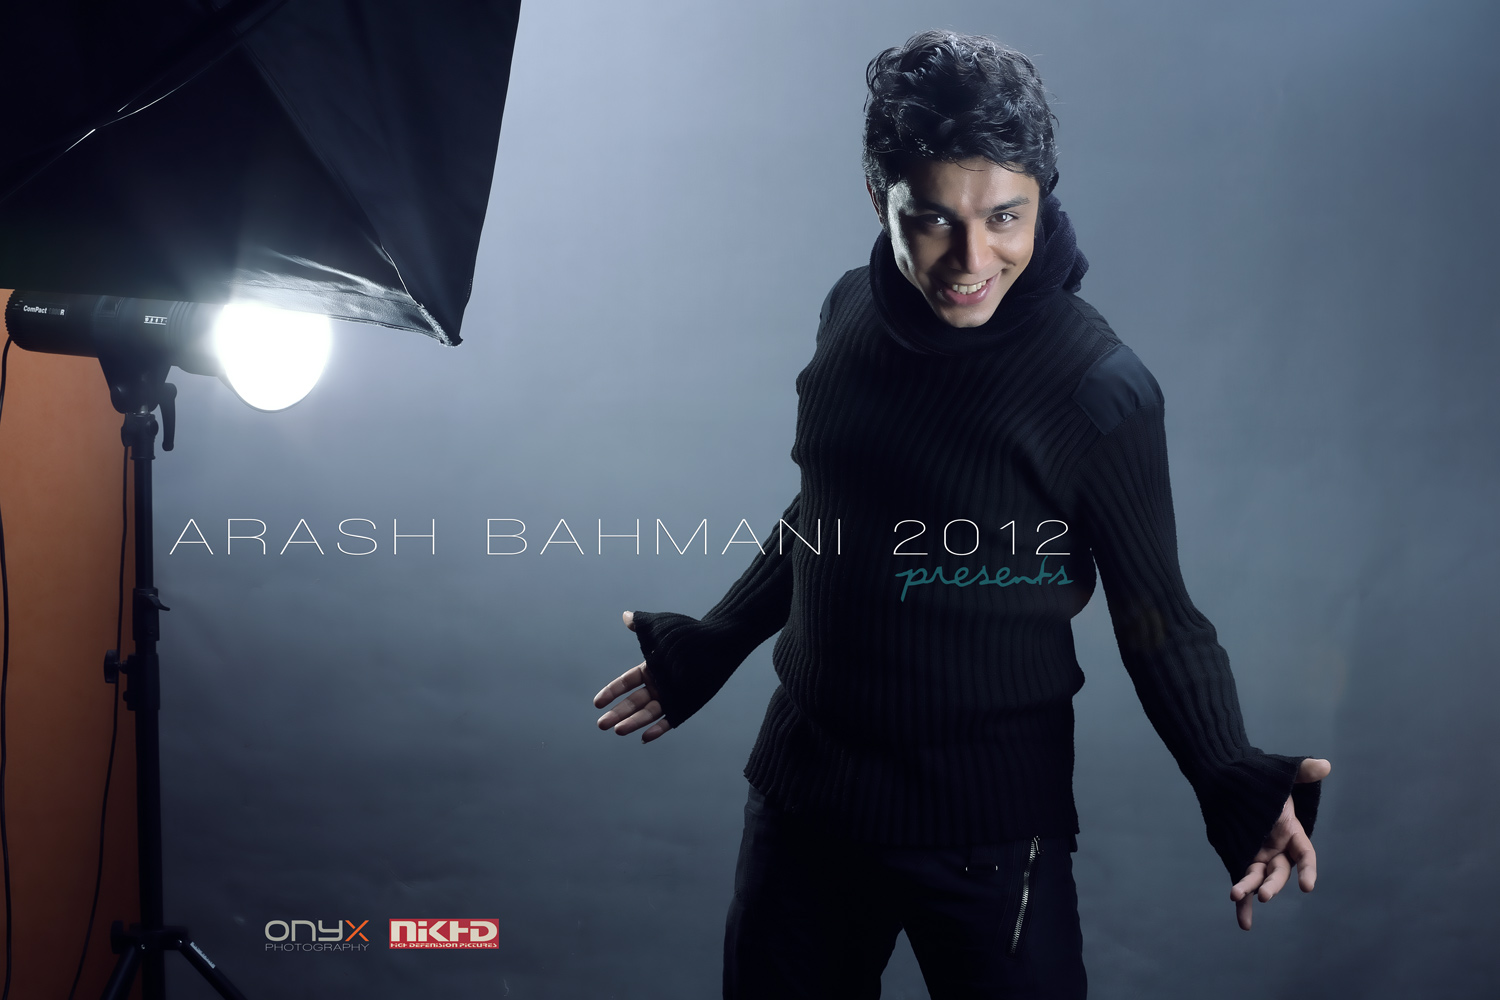 arash bahmani nik known as arash bahmani is smiling at the camera behind the scene of his music video with black clothes and lighting instruments